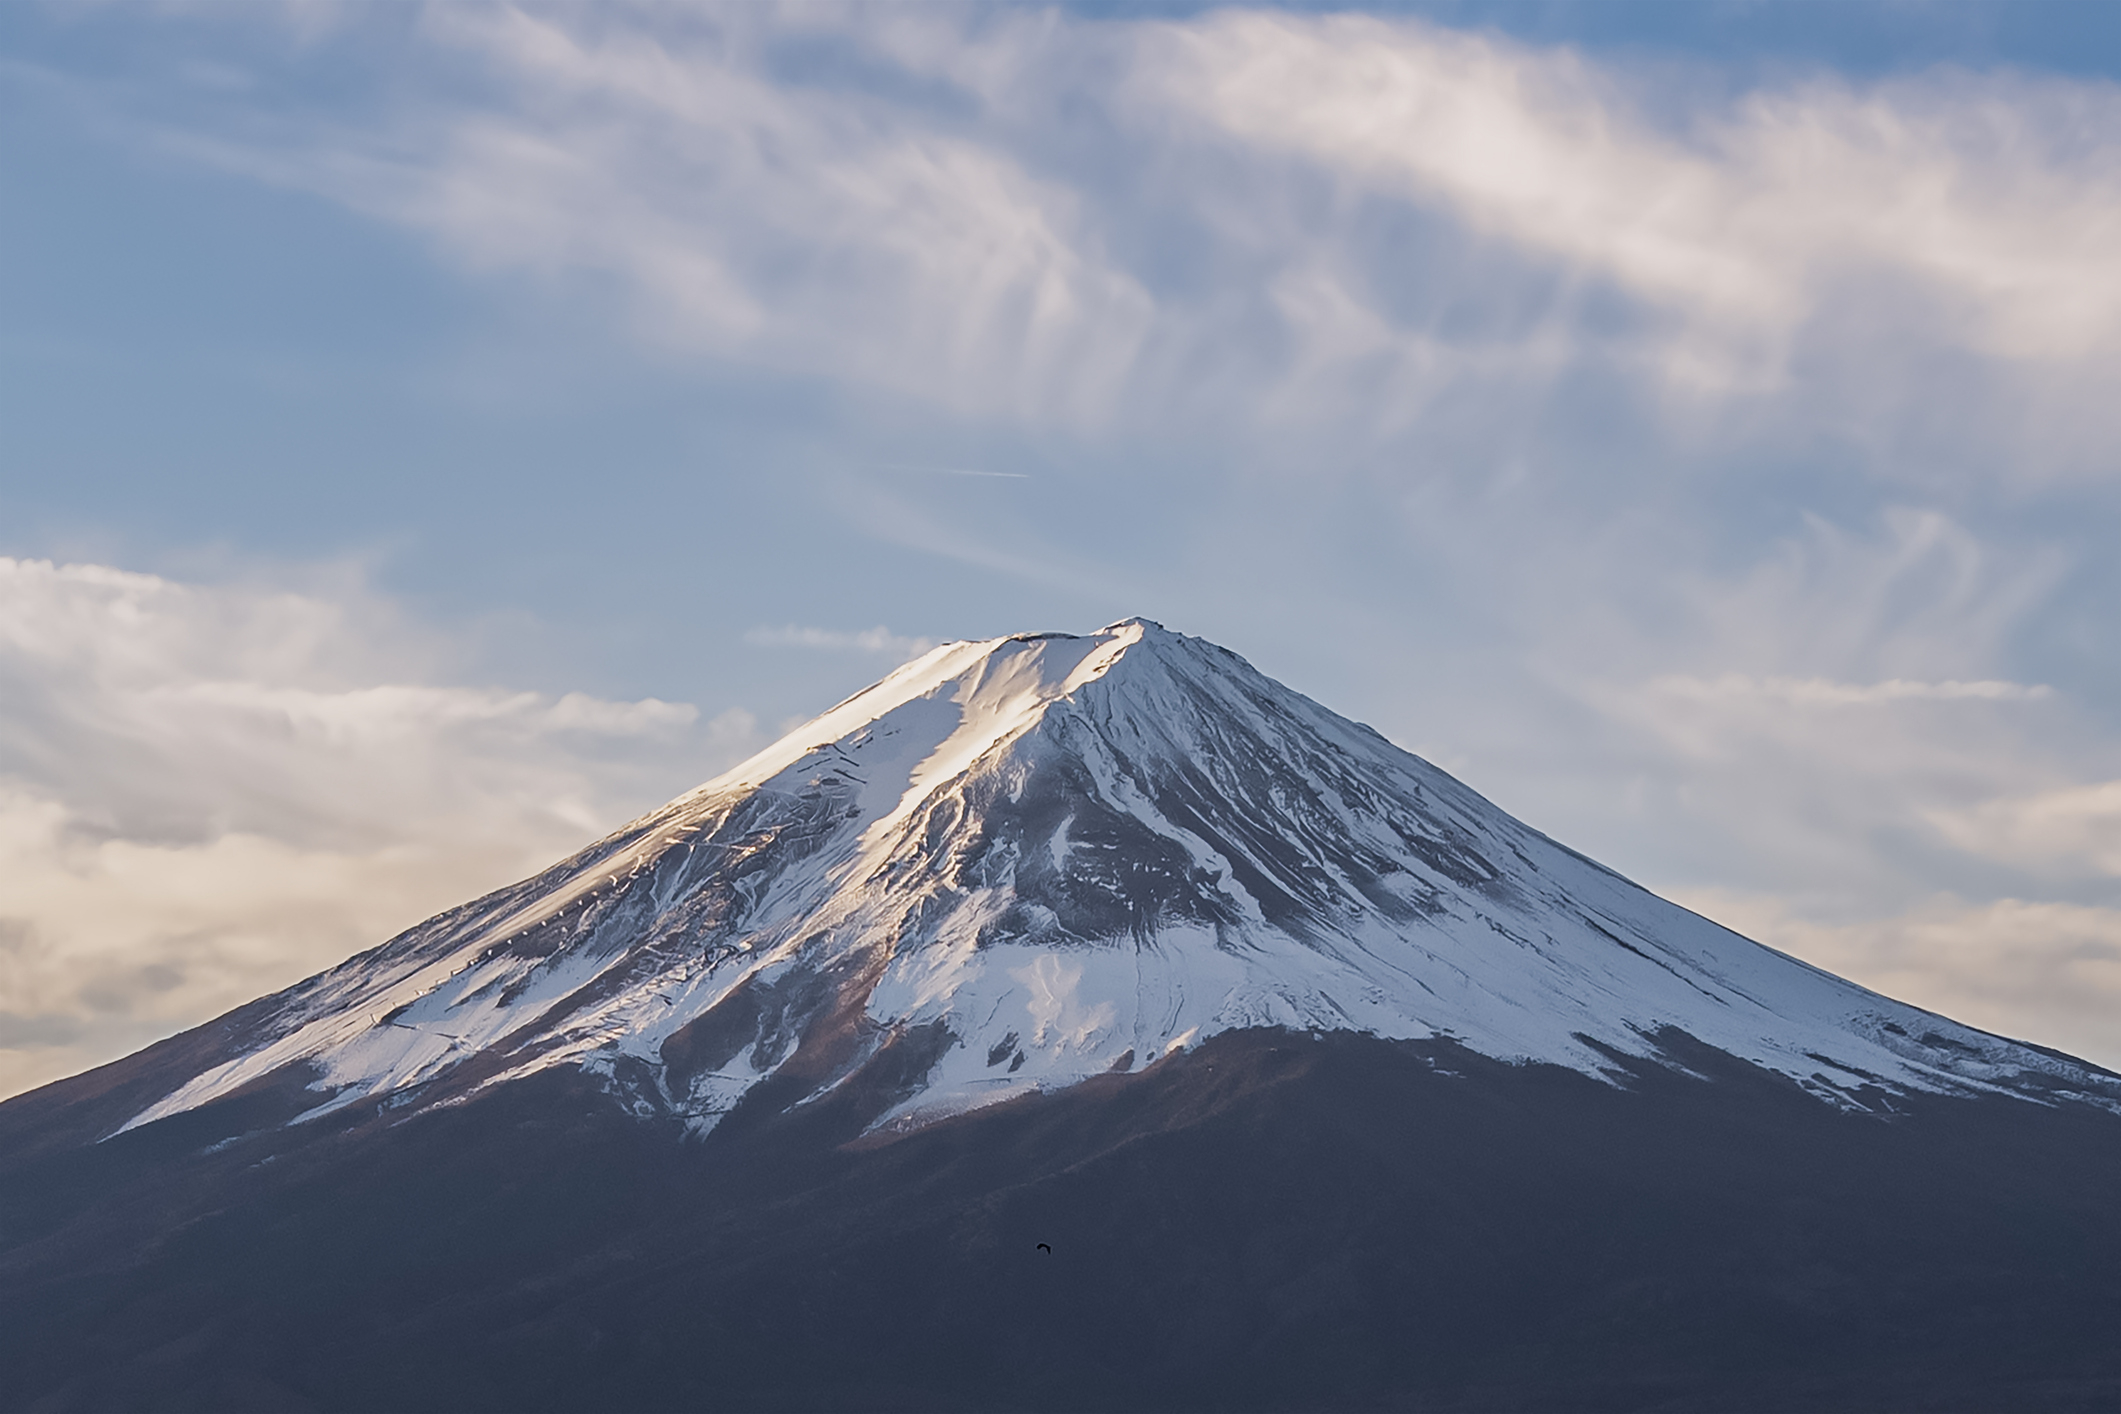 A stunning view of a snow-capped Mount Fuji under a partly cloudy sky